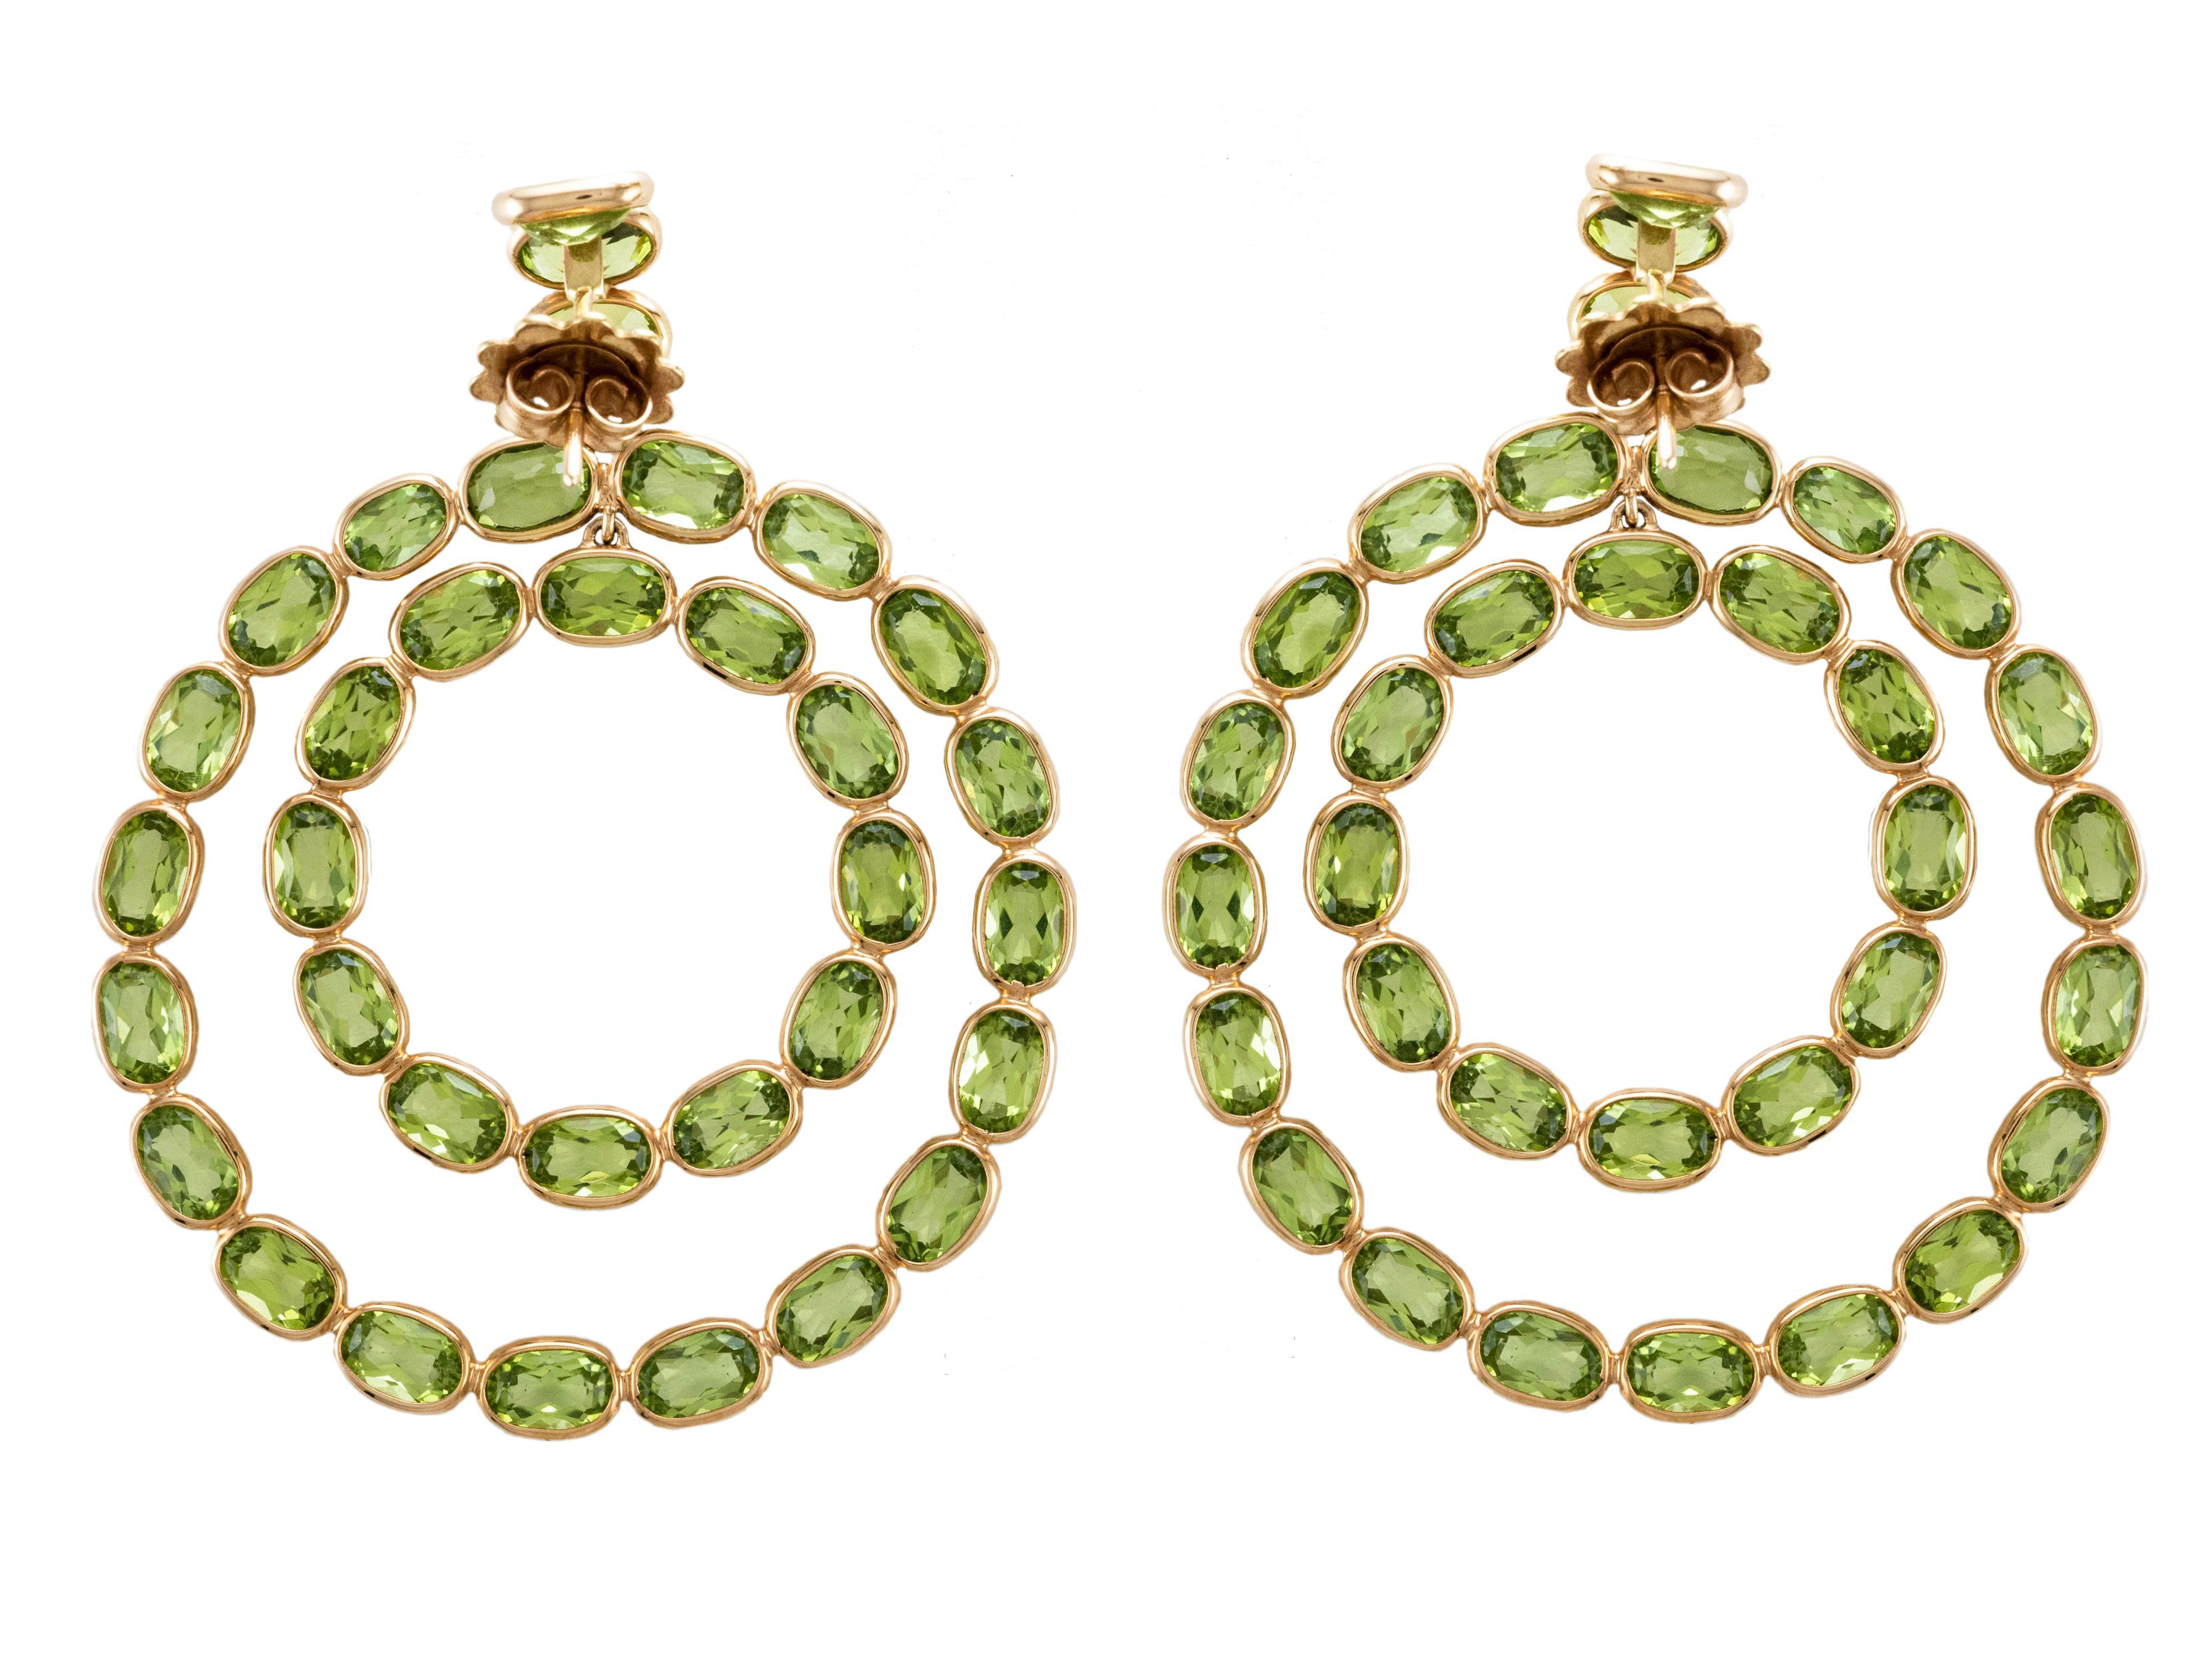 18 Karat rose gold and faceted oval cut Peridot for carat 39,75.
Very lightweight and wearable earrings.
Handmade in Athens. 
Detailed craftsmanship coupled with technical expertise make up the core of the Etho Maria production process.
Each piece